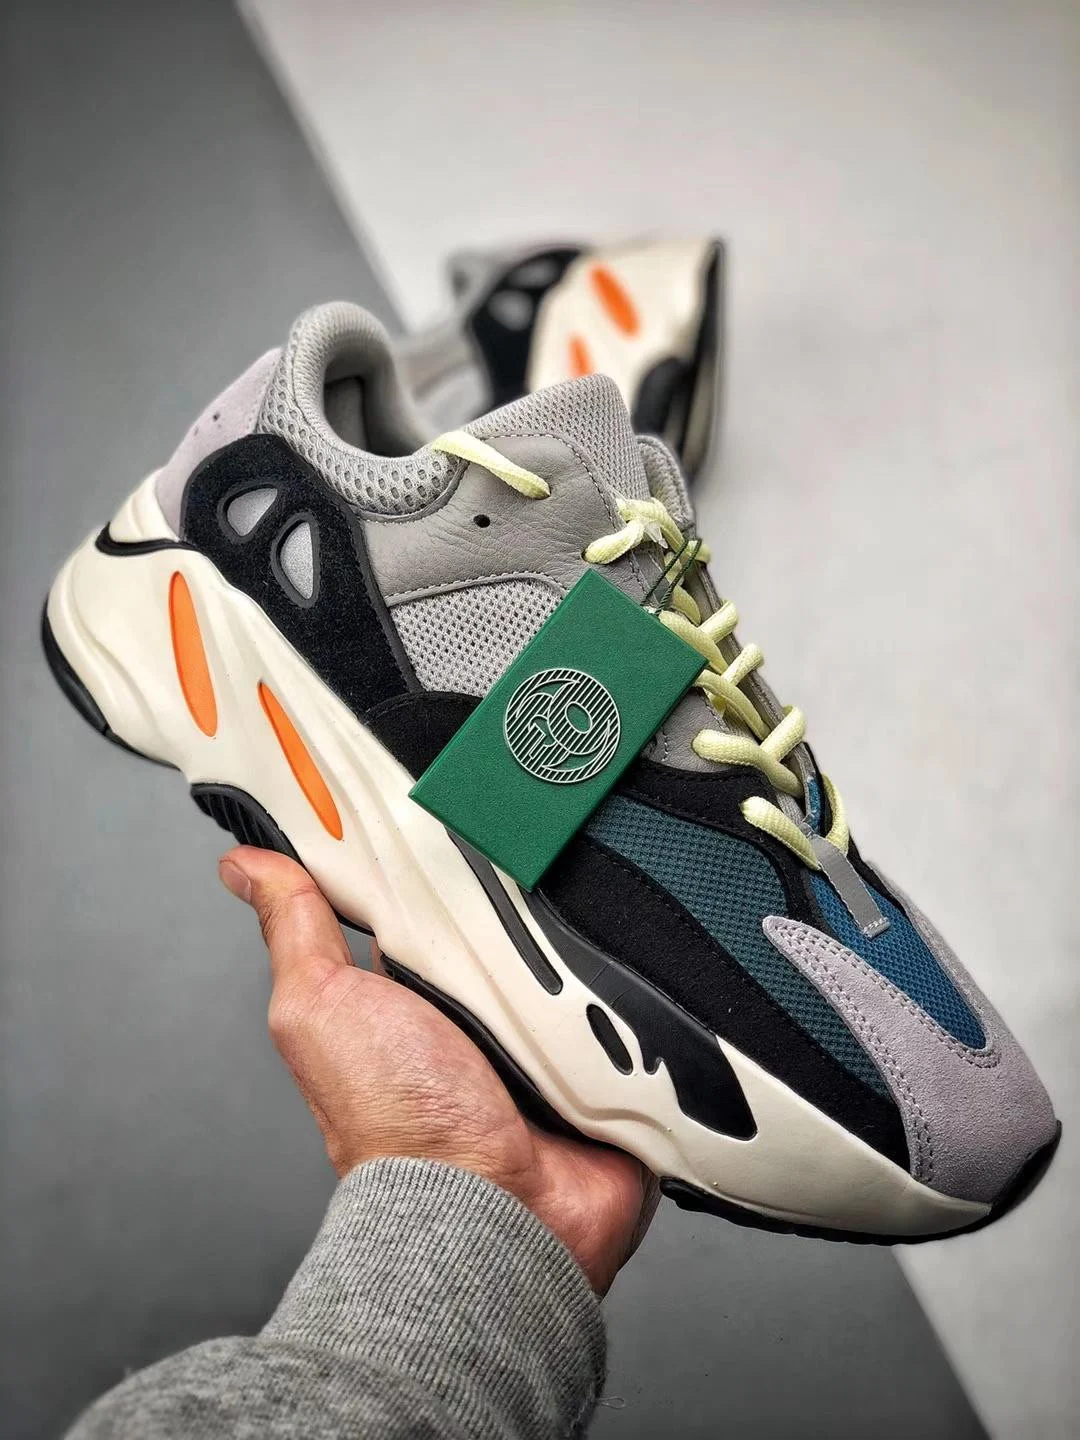 Adidas Yeezy Boost 700 Wave Runner B75571 For Sale